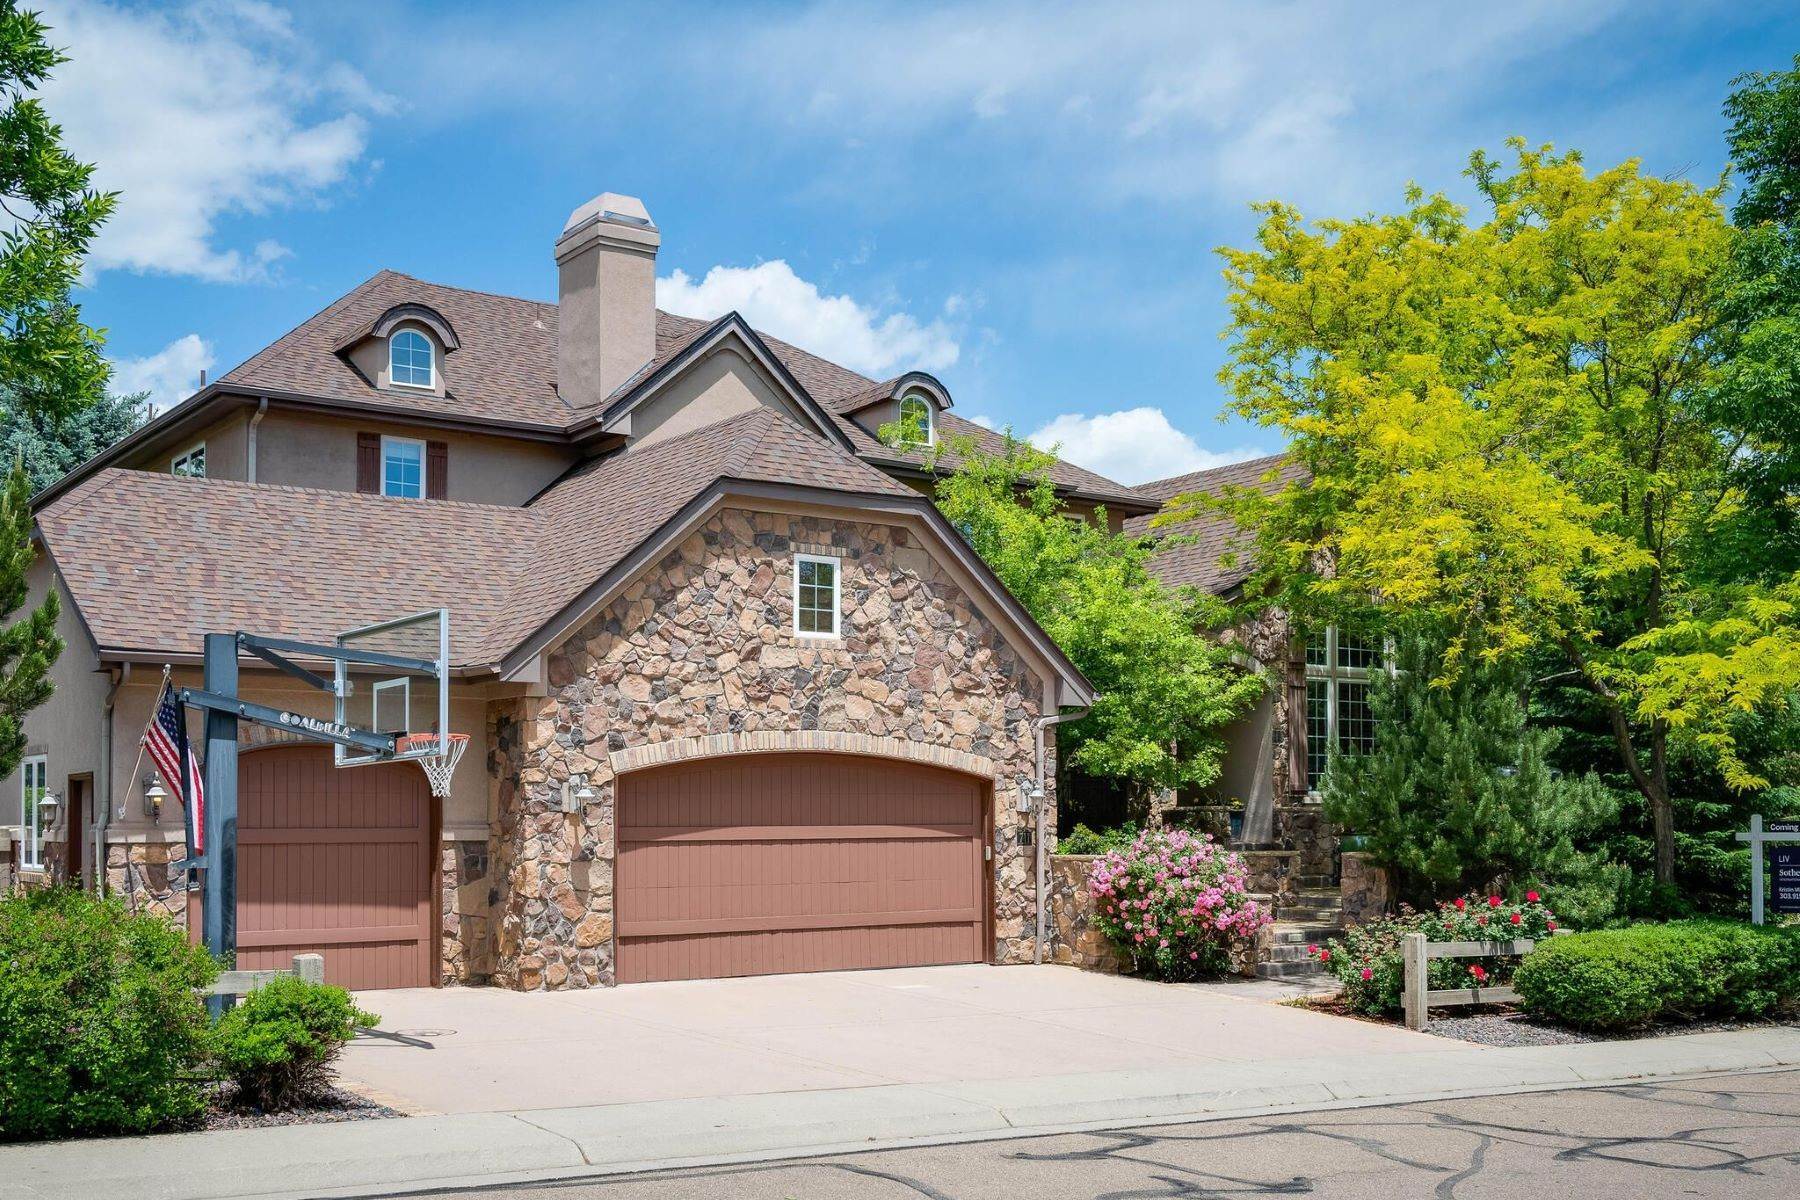 Single Family Homes for Active at This Home Exemplifies Pride of Ownership! Everything About This Home is Gorgeous 711 Skywalker Point Lafayette, Colorado 80026 United States